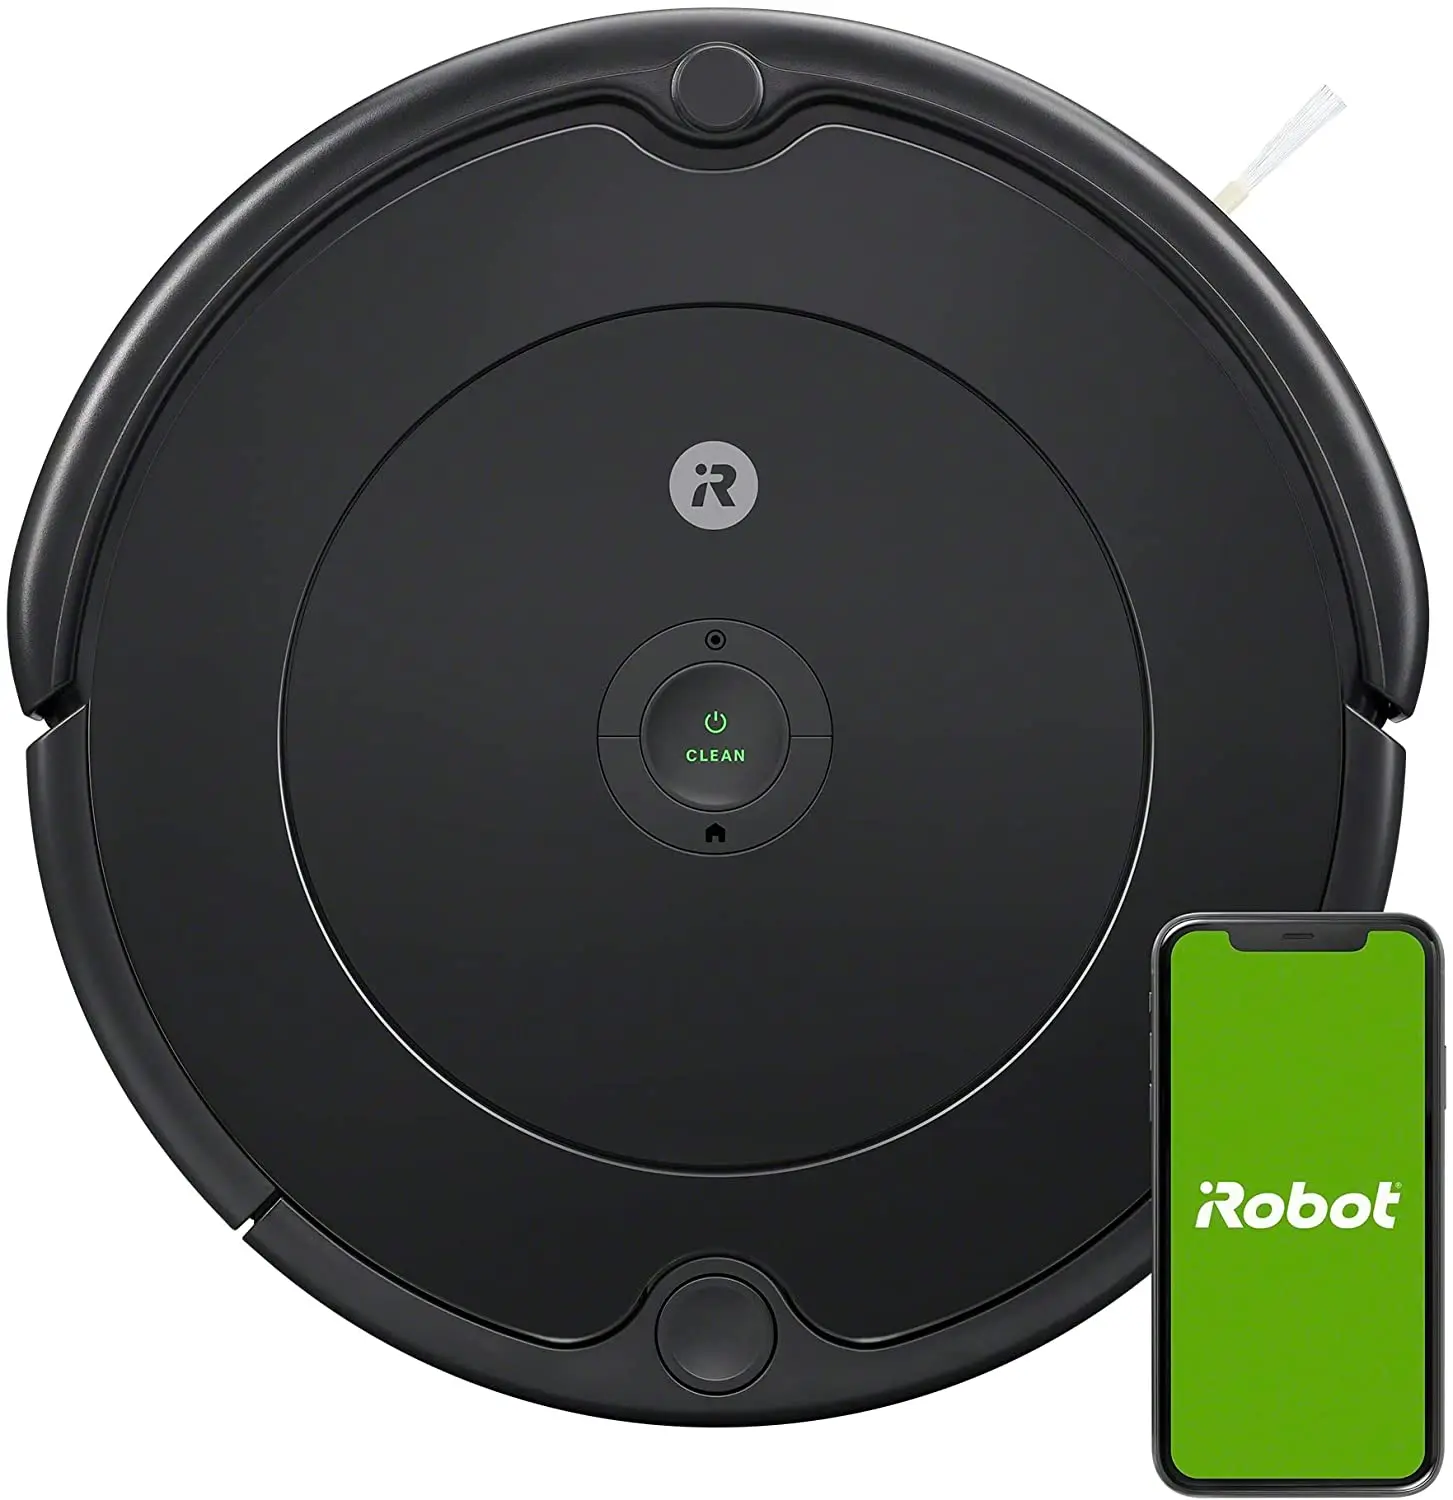 

Roomba 692 Robot Vacuum-Wi-Fi Connectivity, Personalized Cleaning Recommendations, Works with Alexa, Good for Pet Hair, Carpets,